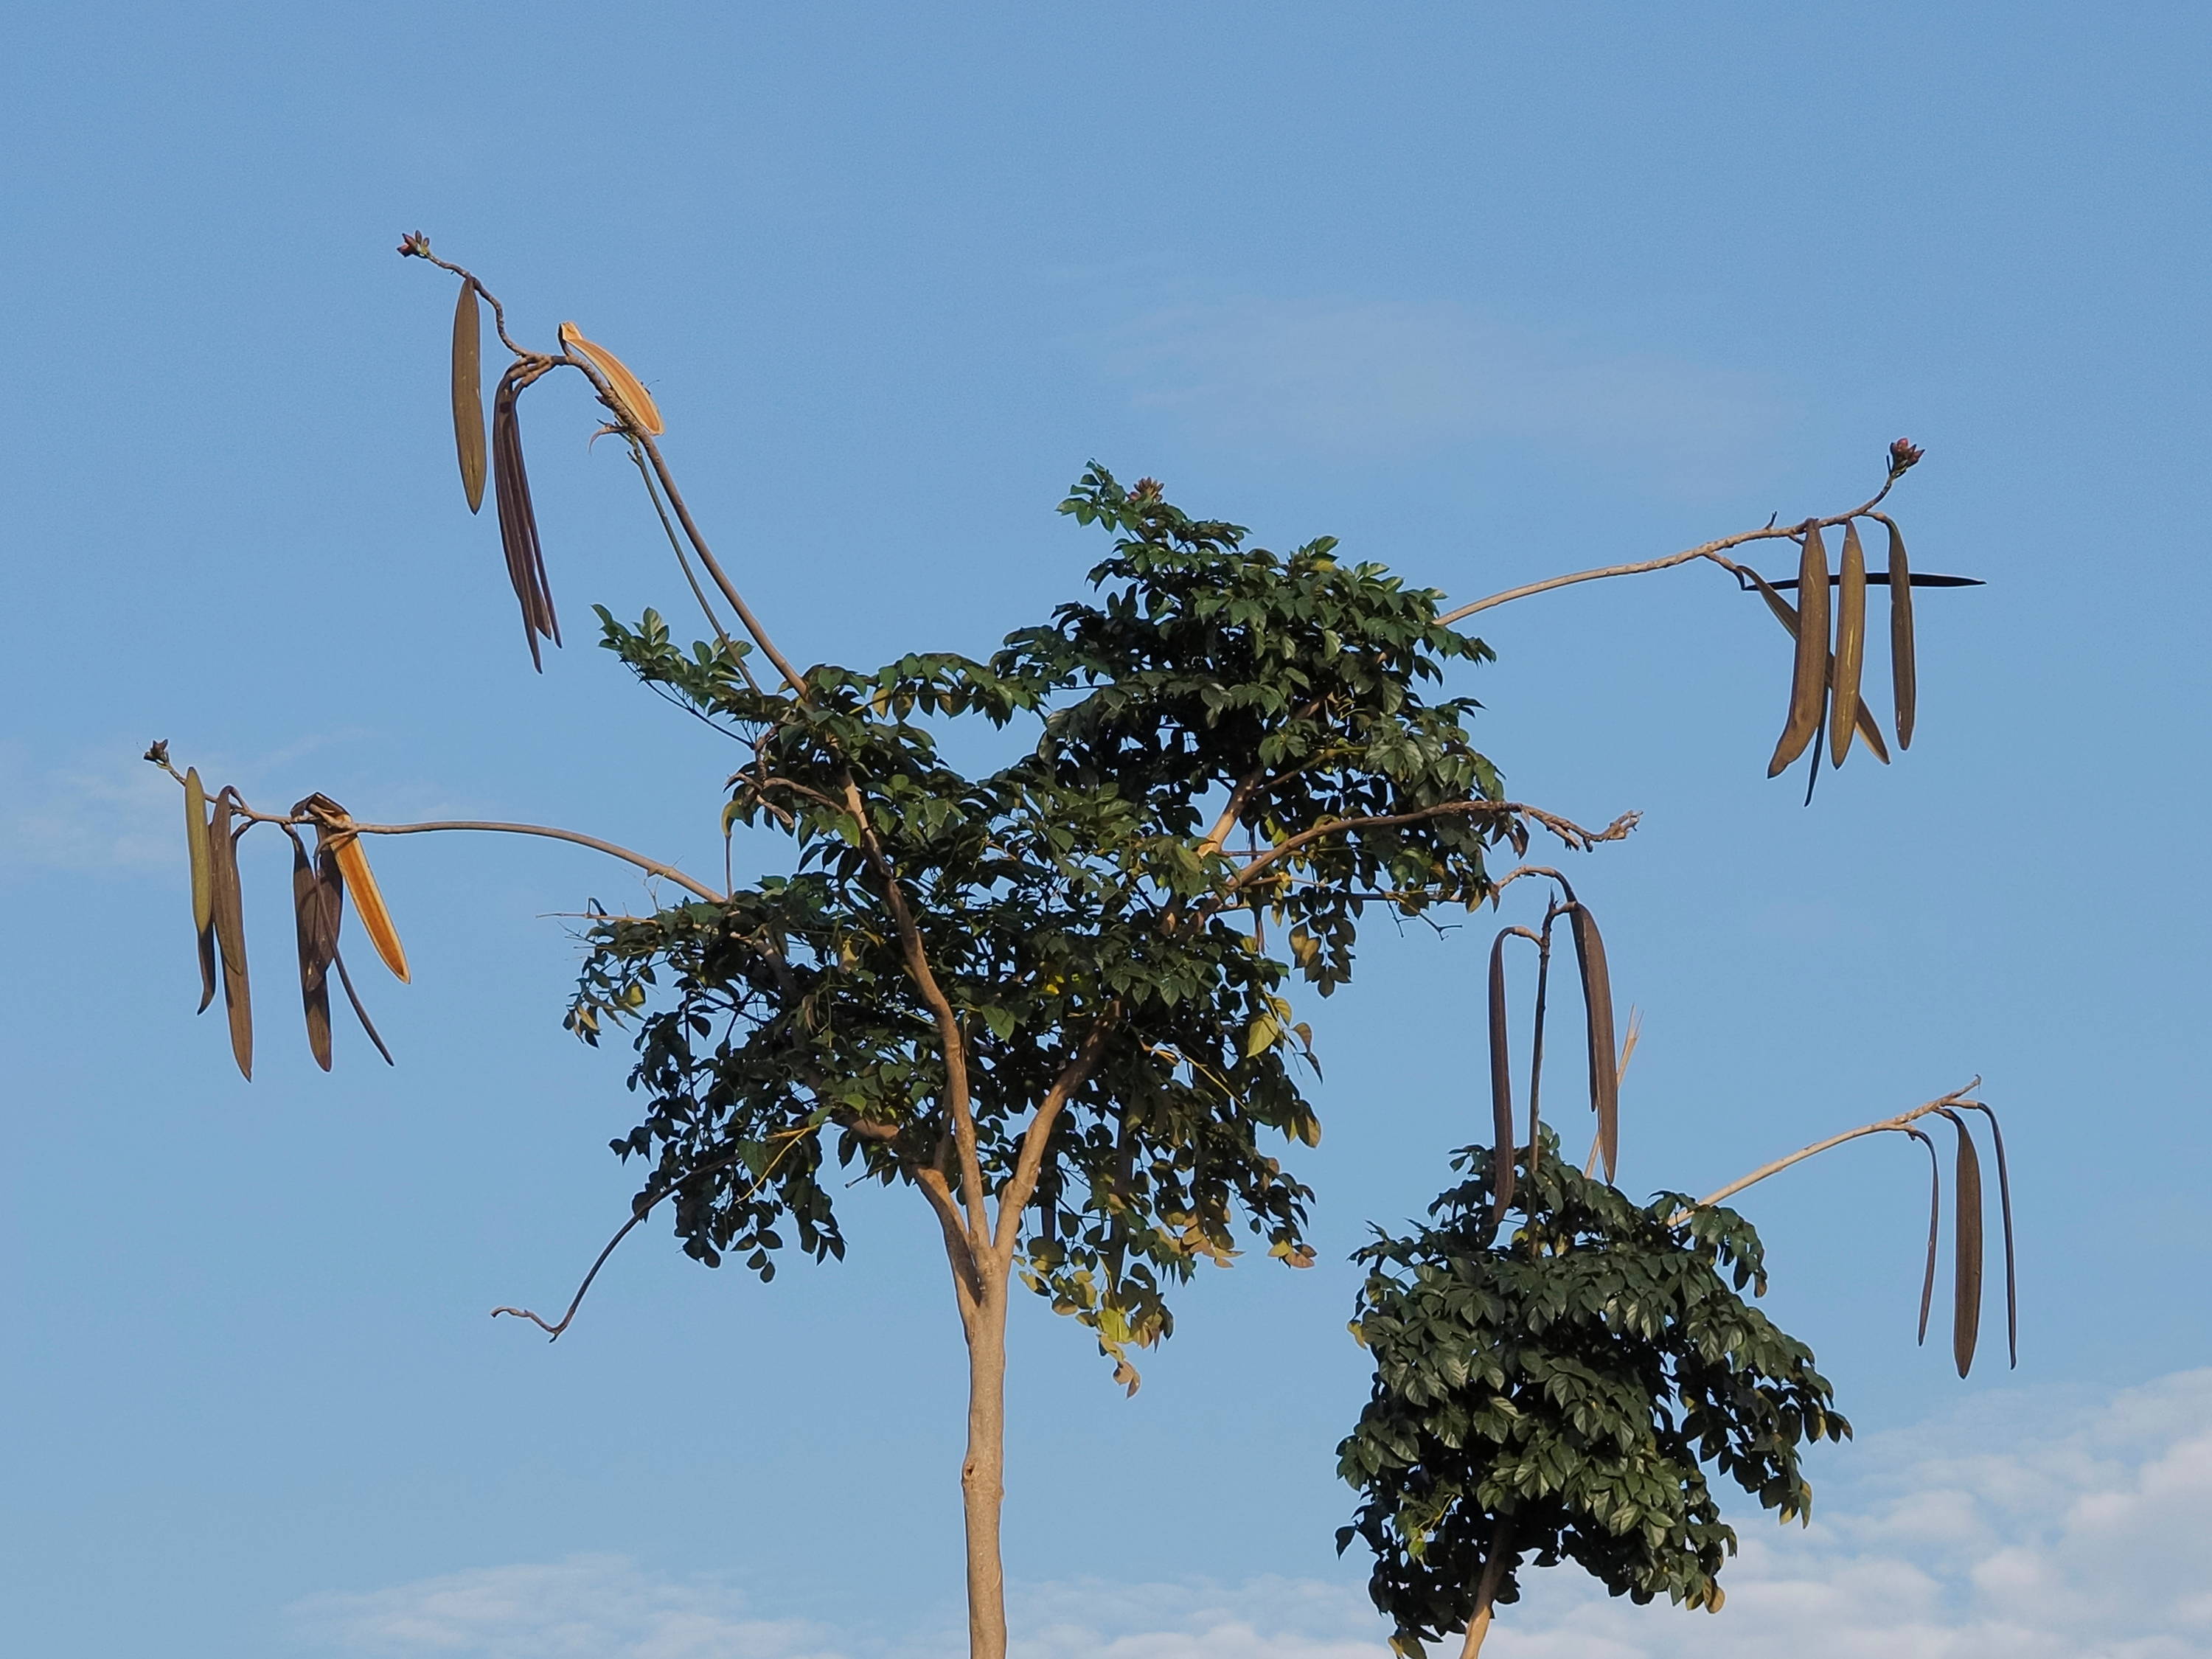 Figure 1. The Oroxylum indicum tree, with its sword-like bean pods dangling from thin branches.